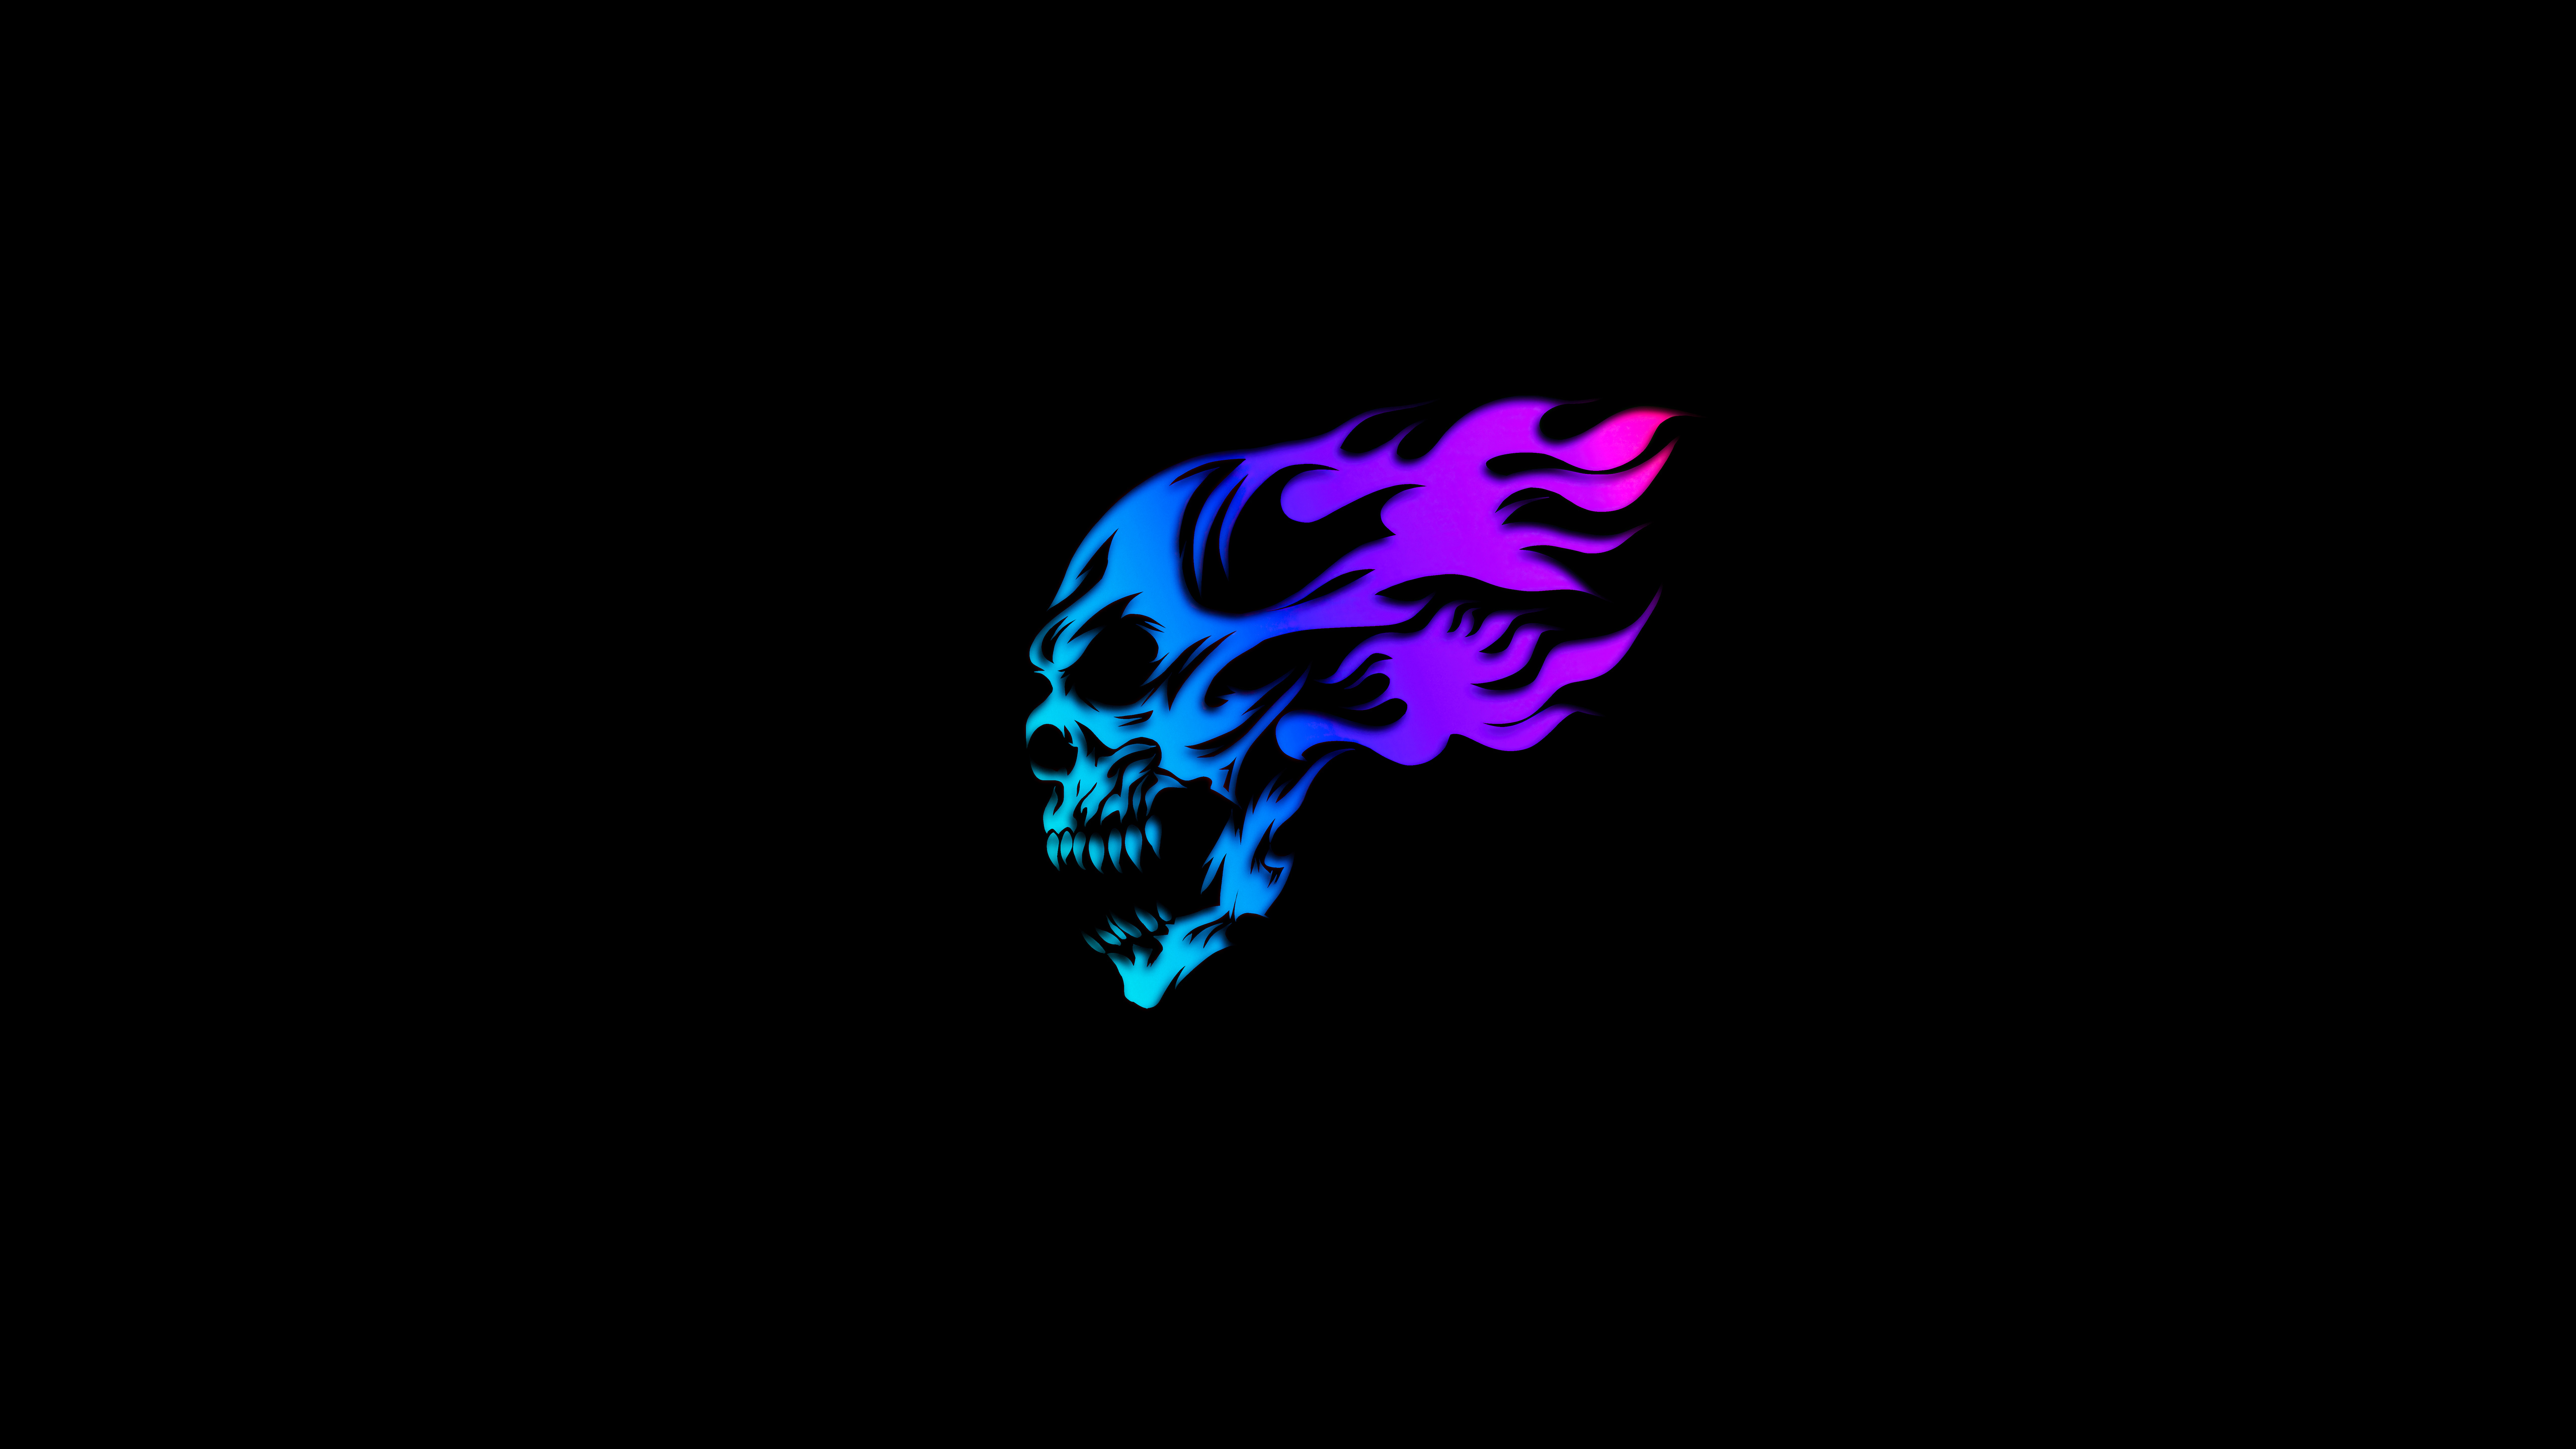 Rendering a purple skull on a black background